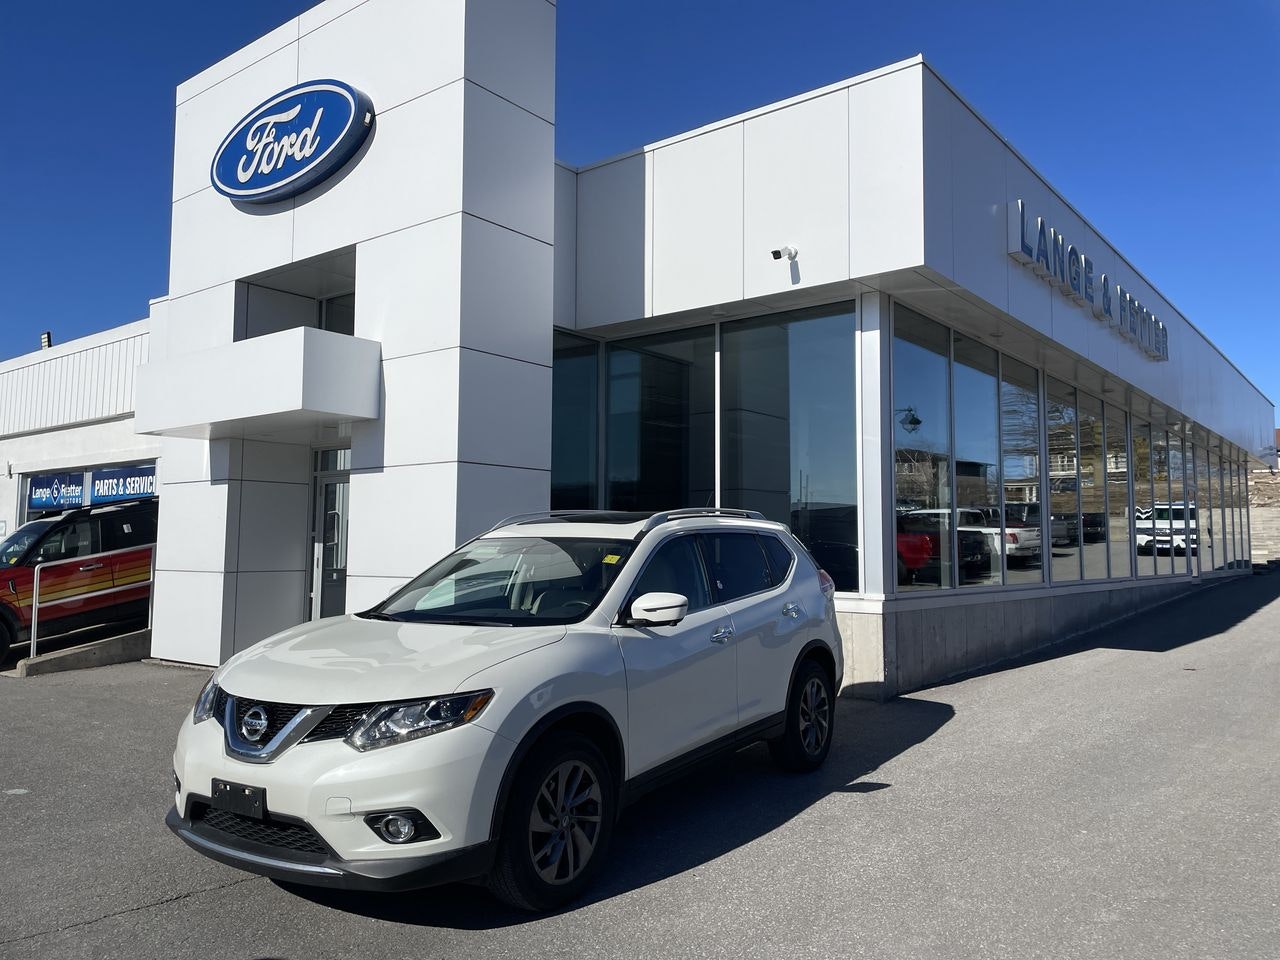 2016 Nissan Rogue - 21545A Full Image 1